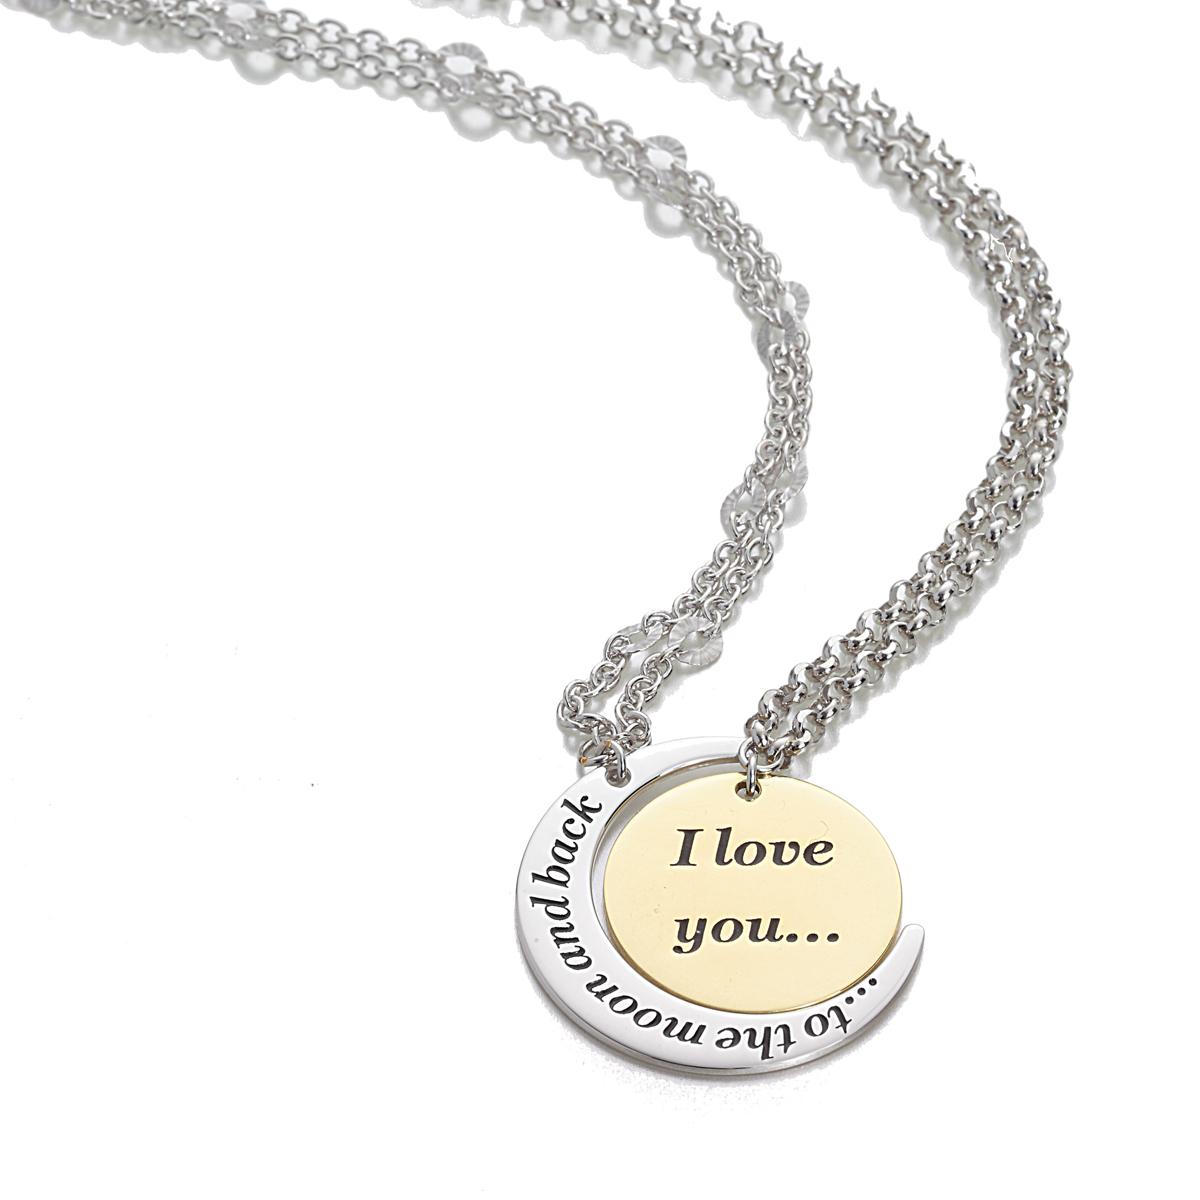 Silver necklaces (one rhodium and one gold) - Perfect gift for Valentine's Day - ZCL1355-MN